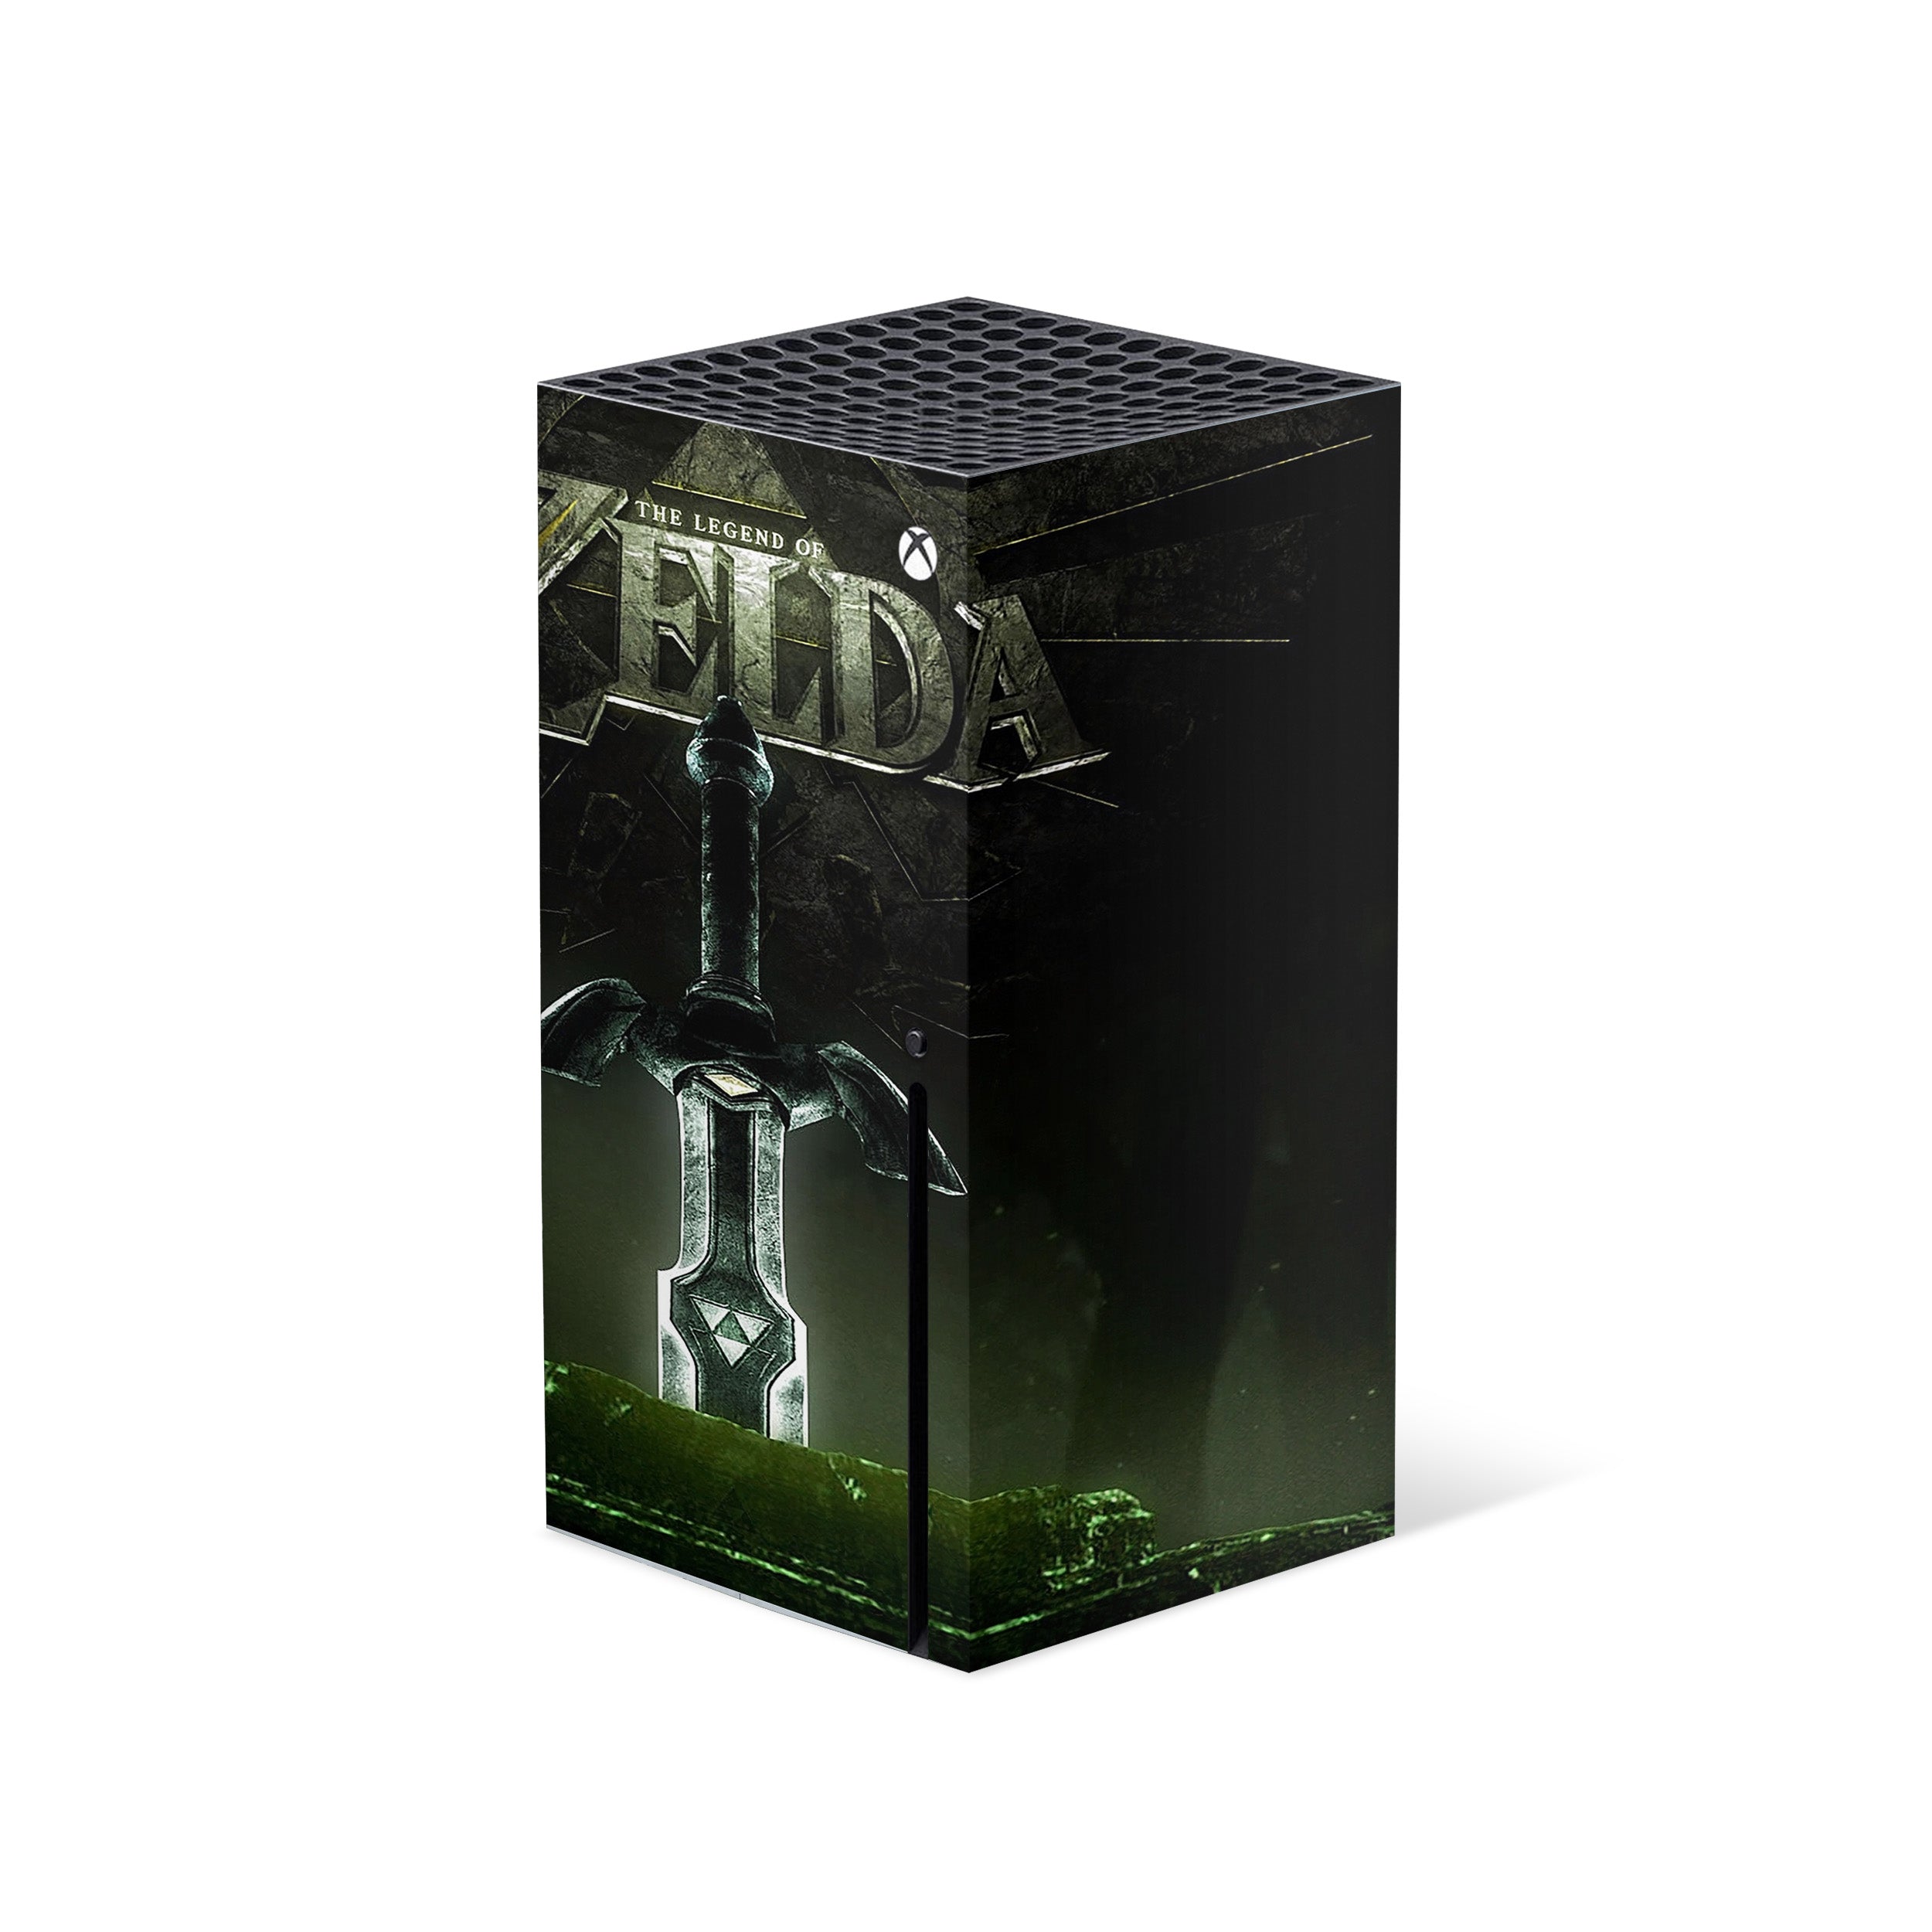 A video game skin featuring a Zelda design for the Xbox Series X.